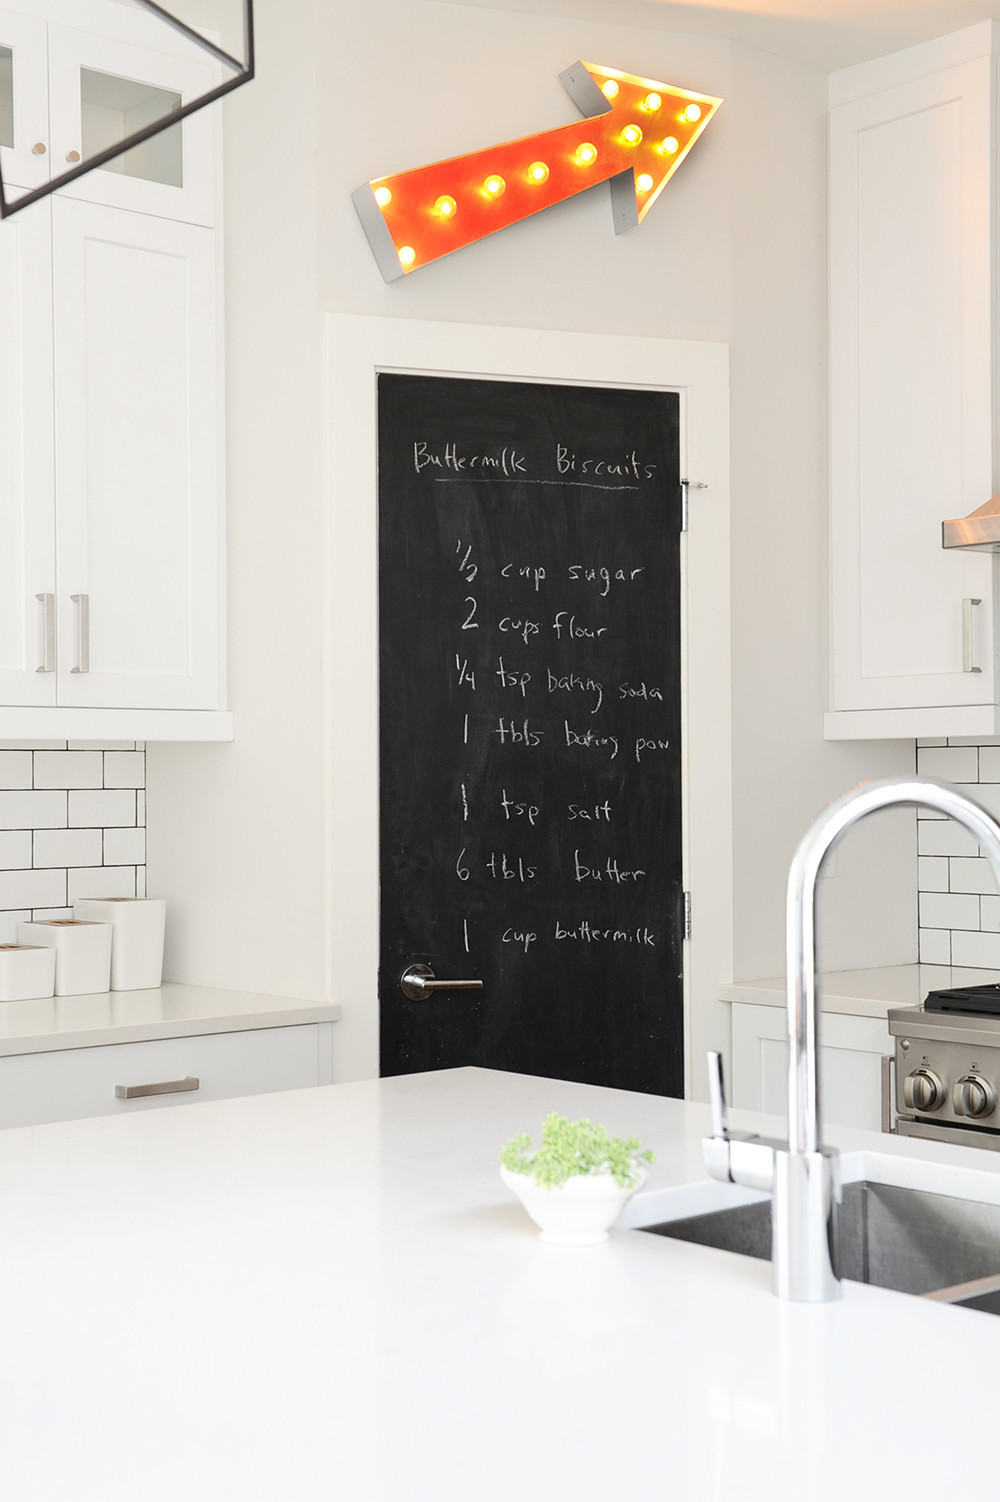 A monochromatic white kitchen with a basement door chalkboard and LED arrow sign